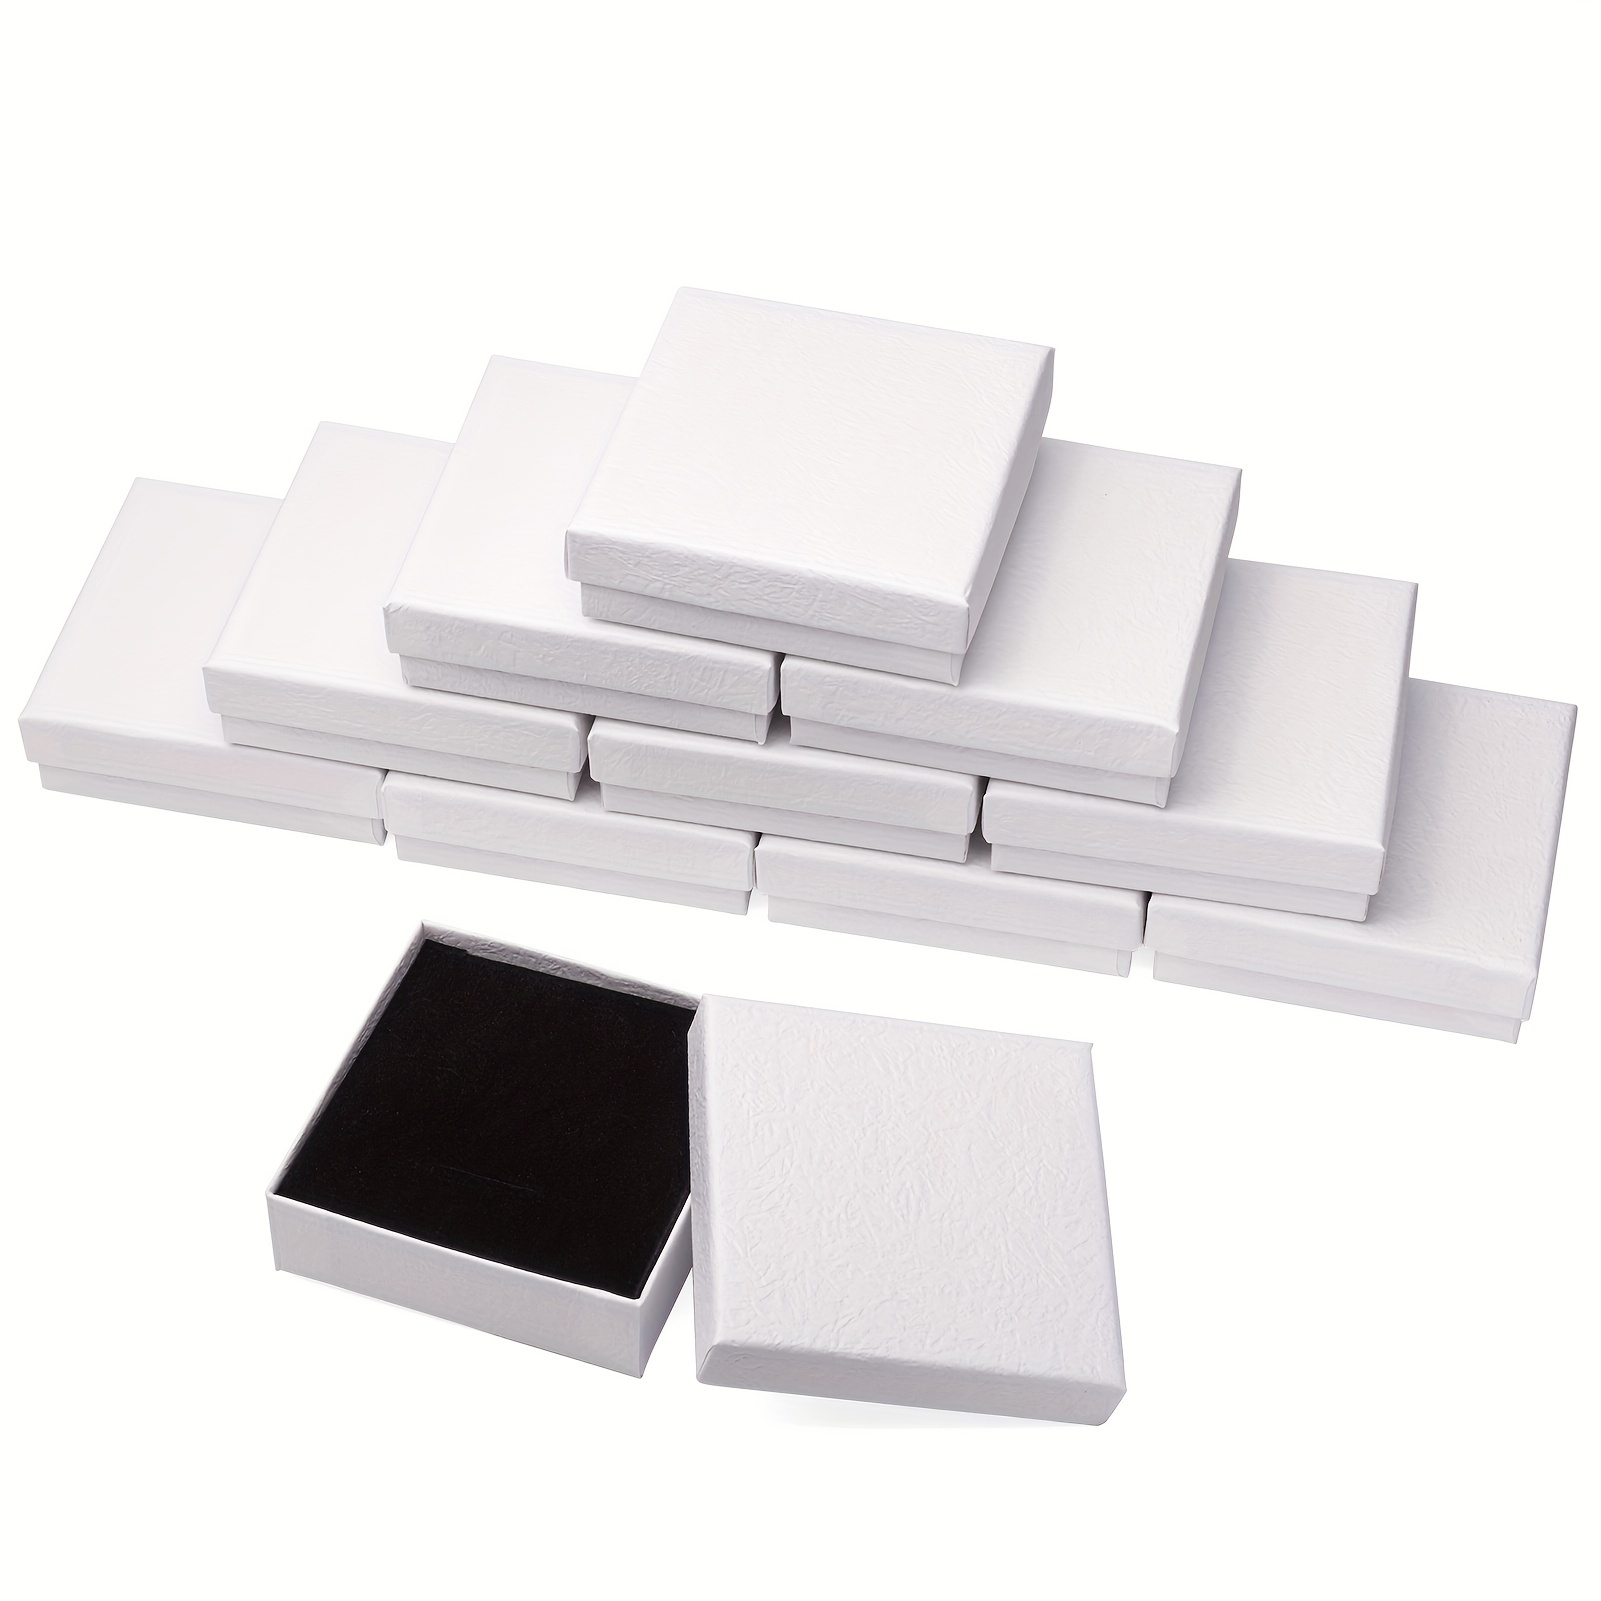 

18pcs Jewelry Paper Gift Box White Square Cardboard Necklace Bracelet Earrings Gift Box For Jewelry Gift Wrapping Jewelry Packaging Box